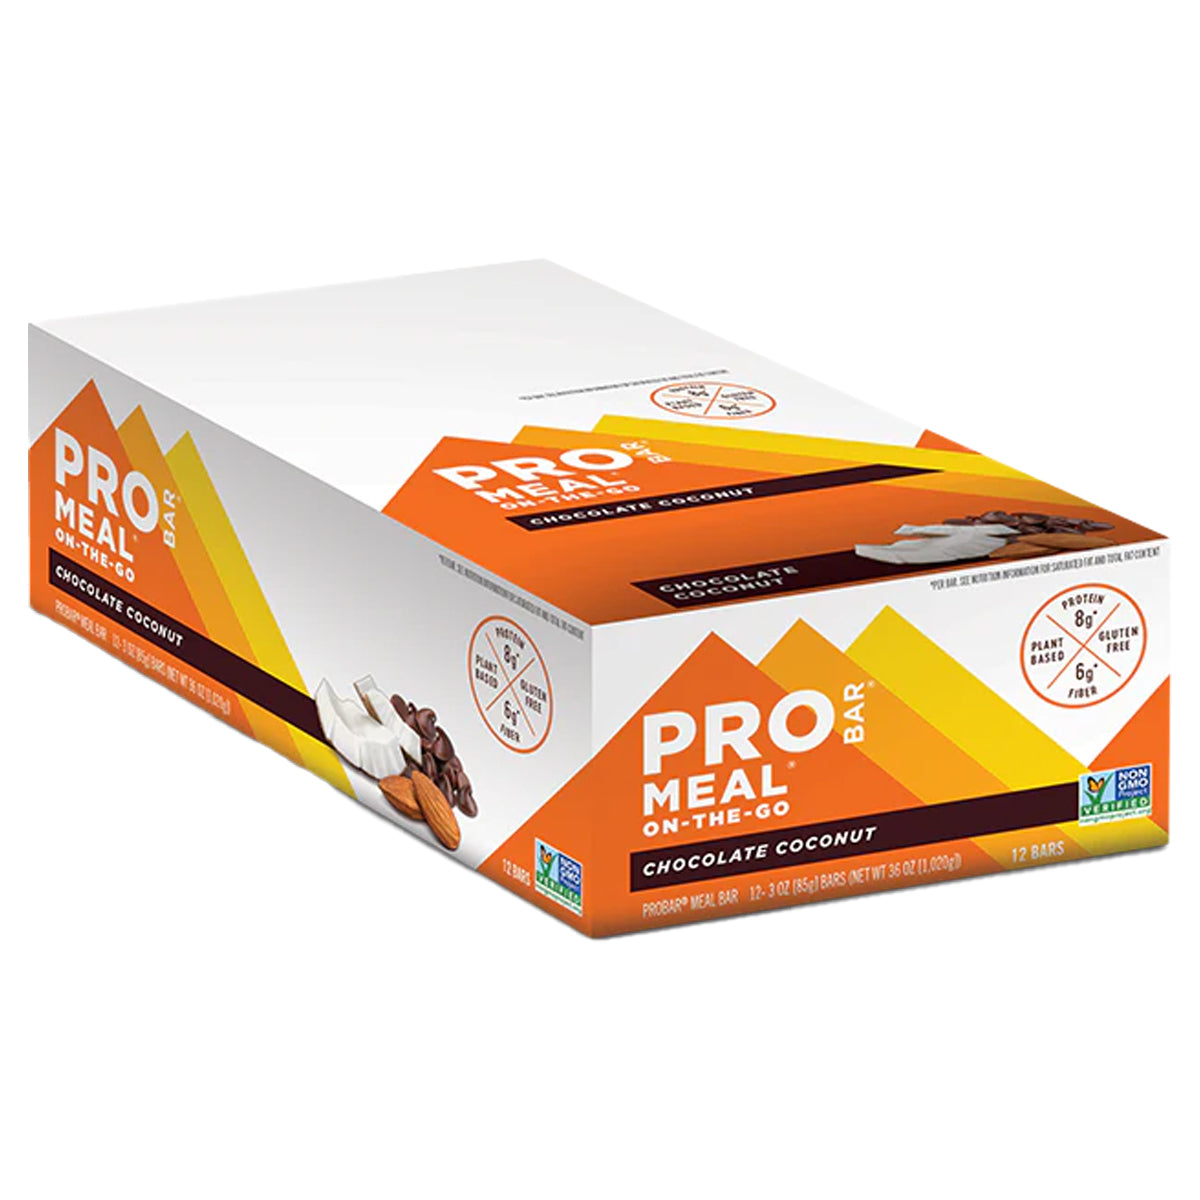 PROBAR Meal Bar in Chocolate Coconut by GOHUNT | Pro Bar - GOHUNT Shop